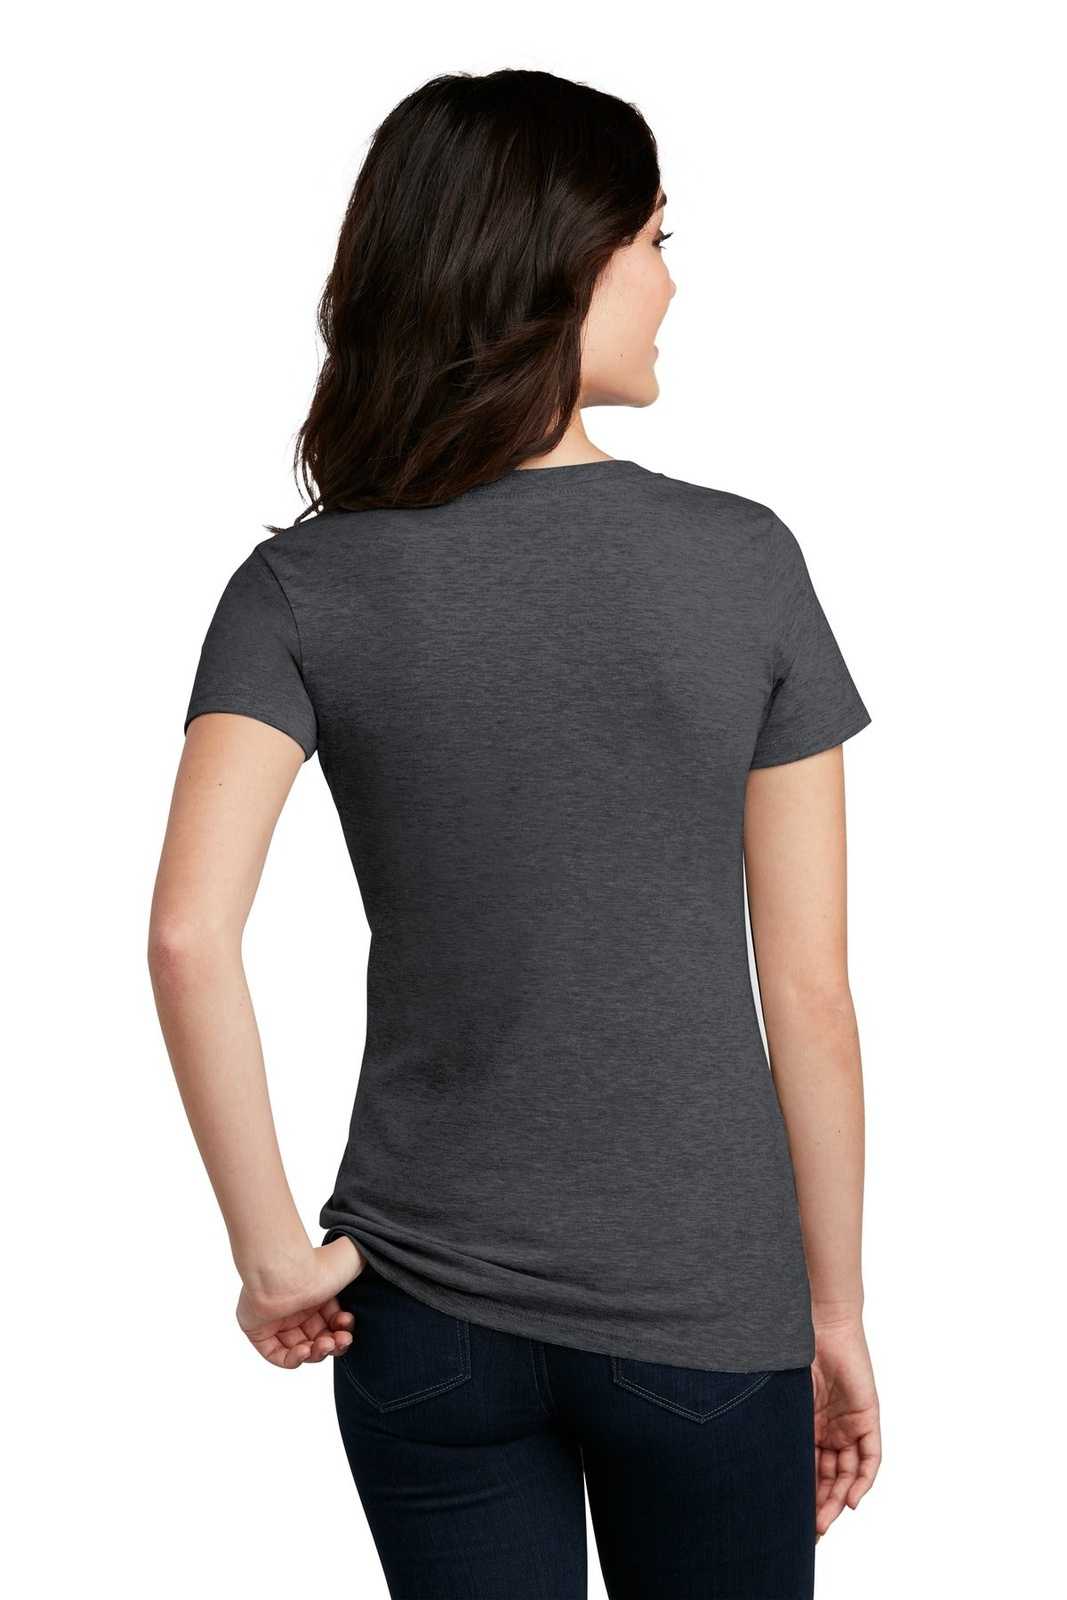 District DM1190L Women's Perfect Blend V-Neck Tee - Heathered Charcoal - HIT a Double - 1